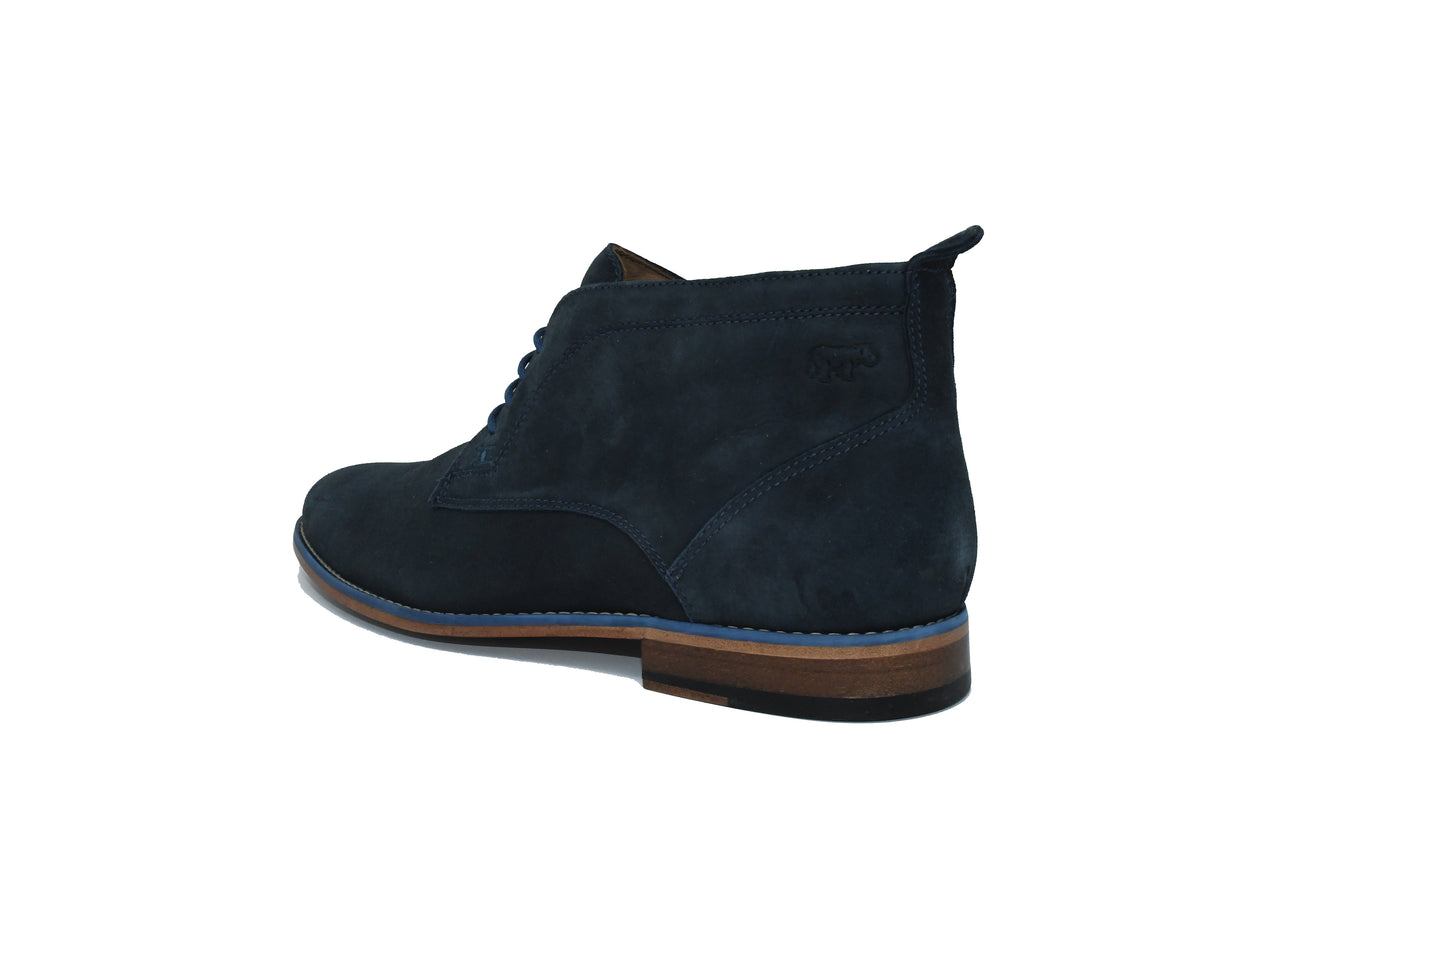 CASUAL CHIC BOOTS - NAVY BLUE & DARK BLUE